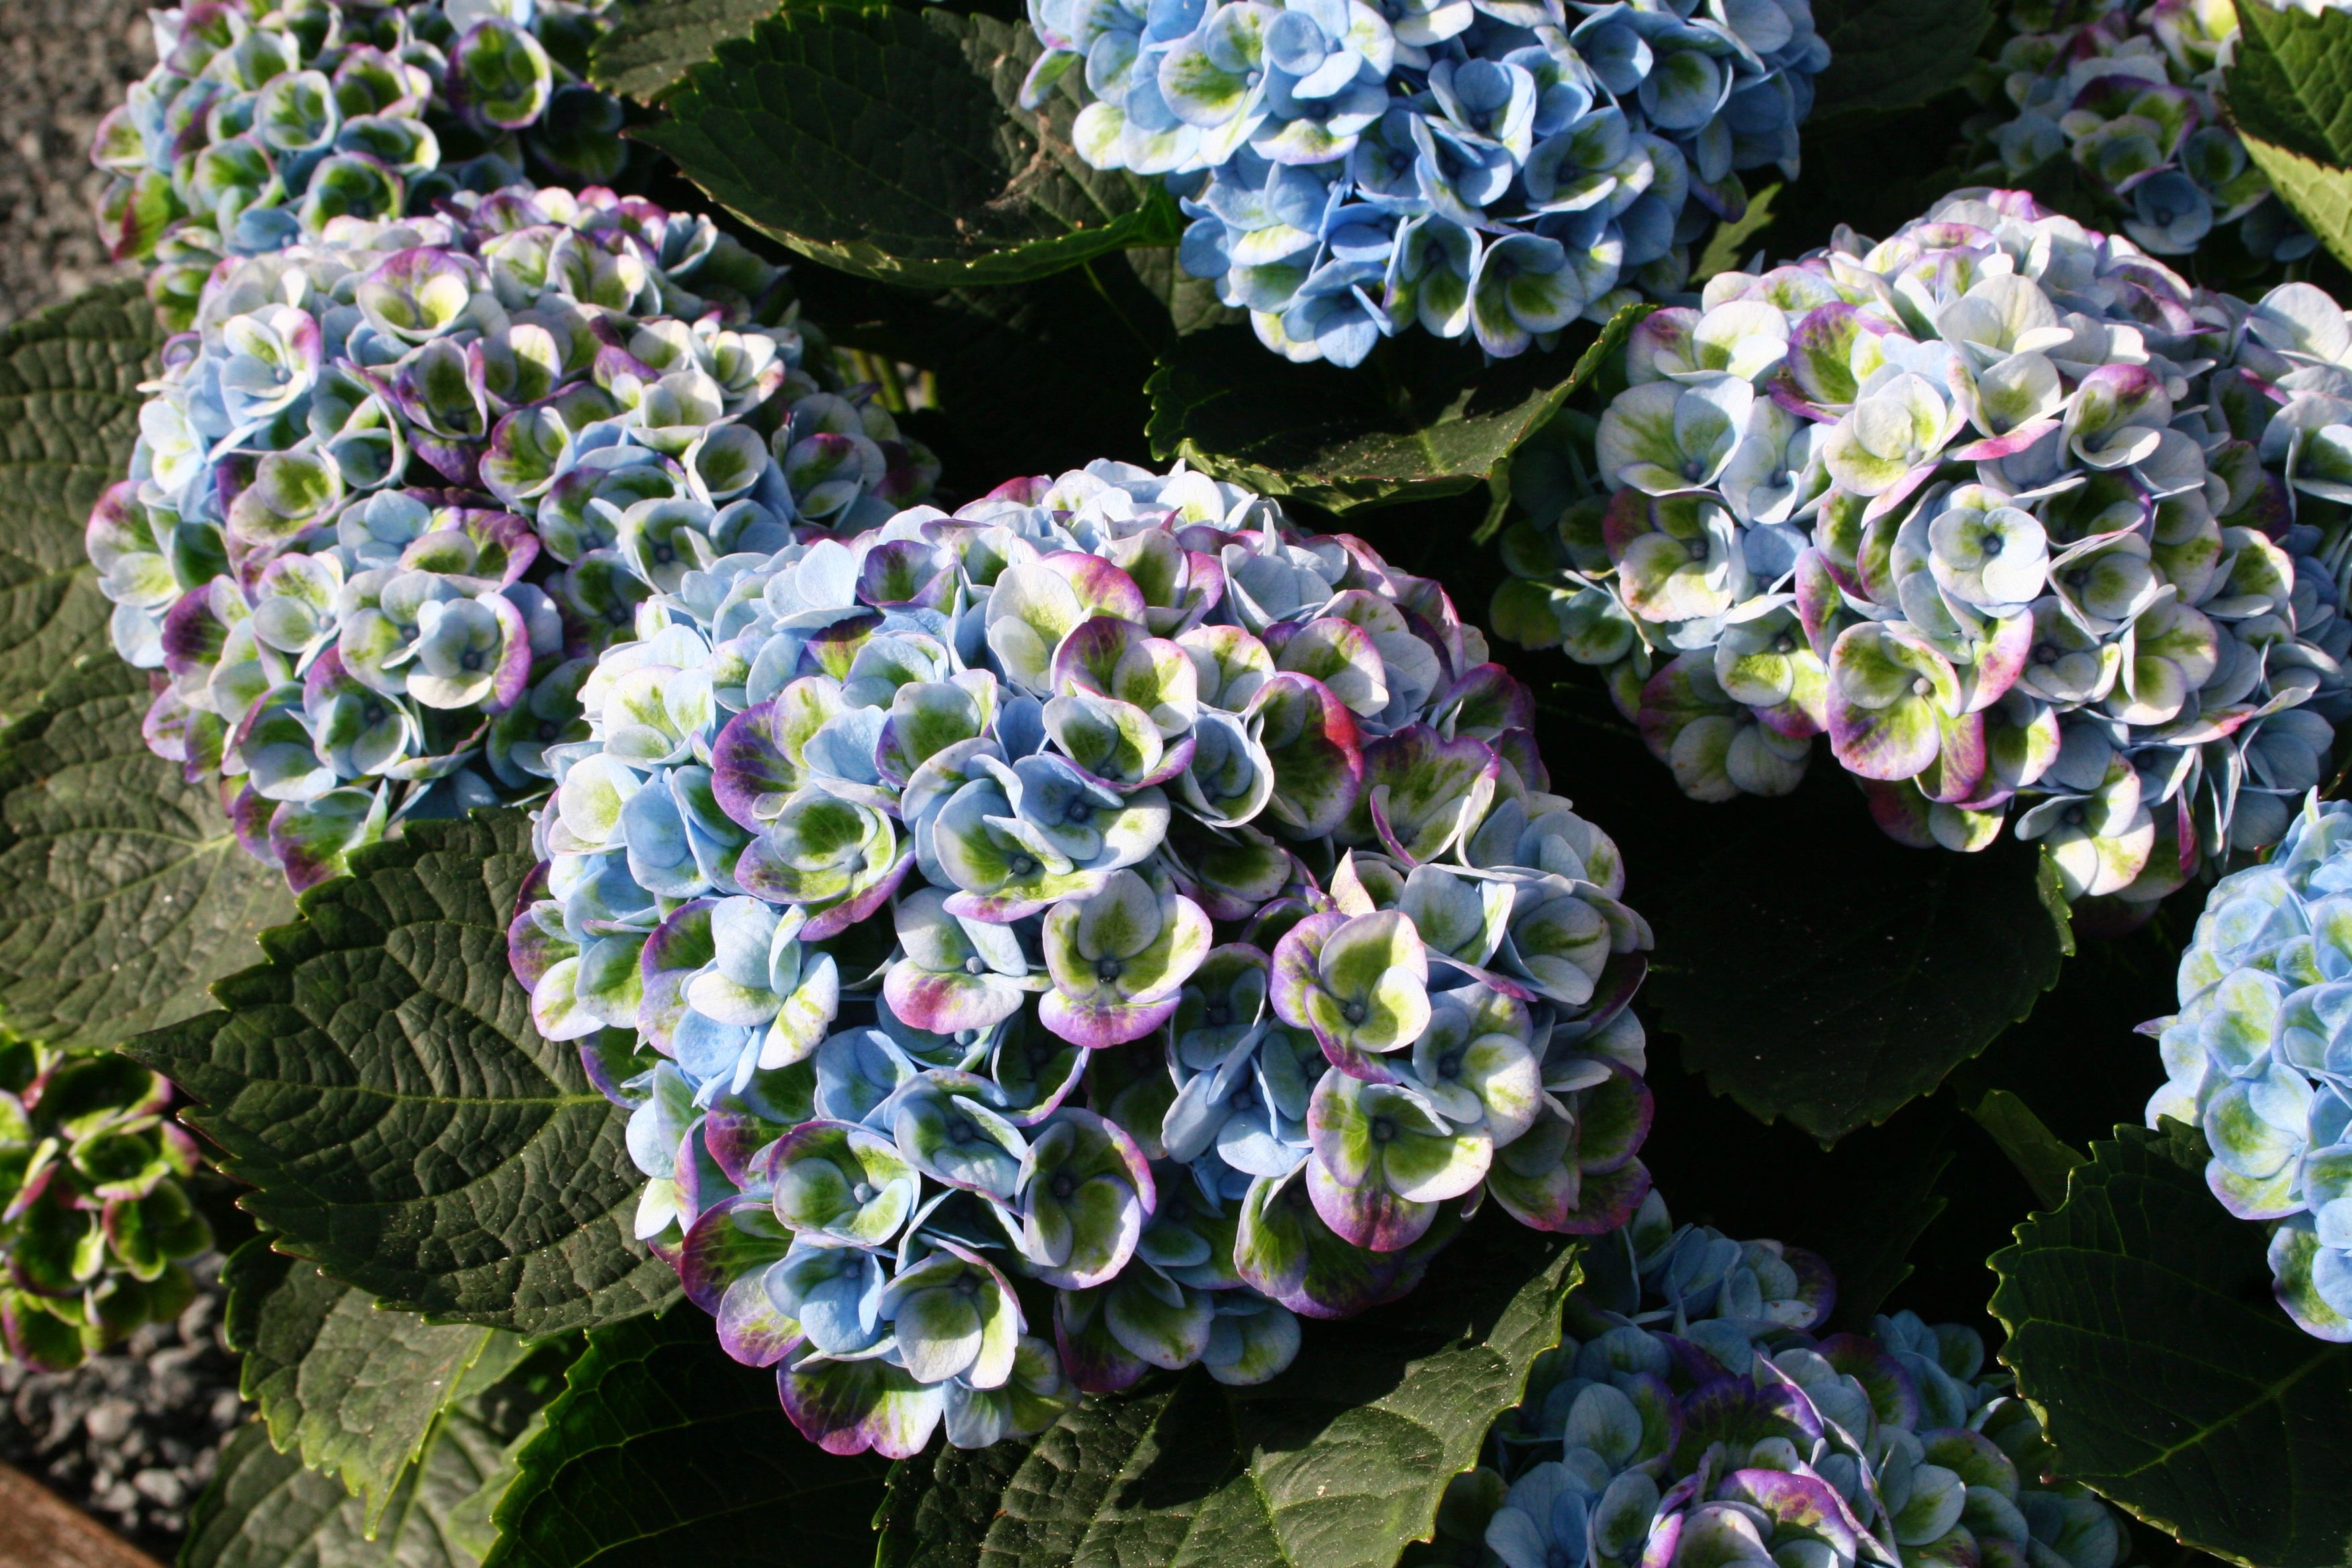 images/plants/hydrangea/hyd-magical-everlasting-revolution/hyd-magical-everlasting-revolution-0088.jpg